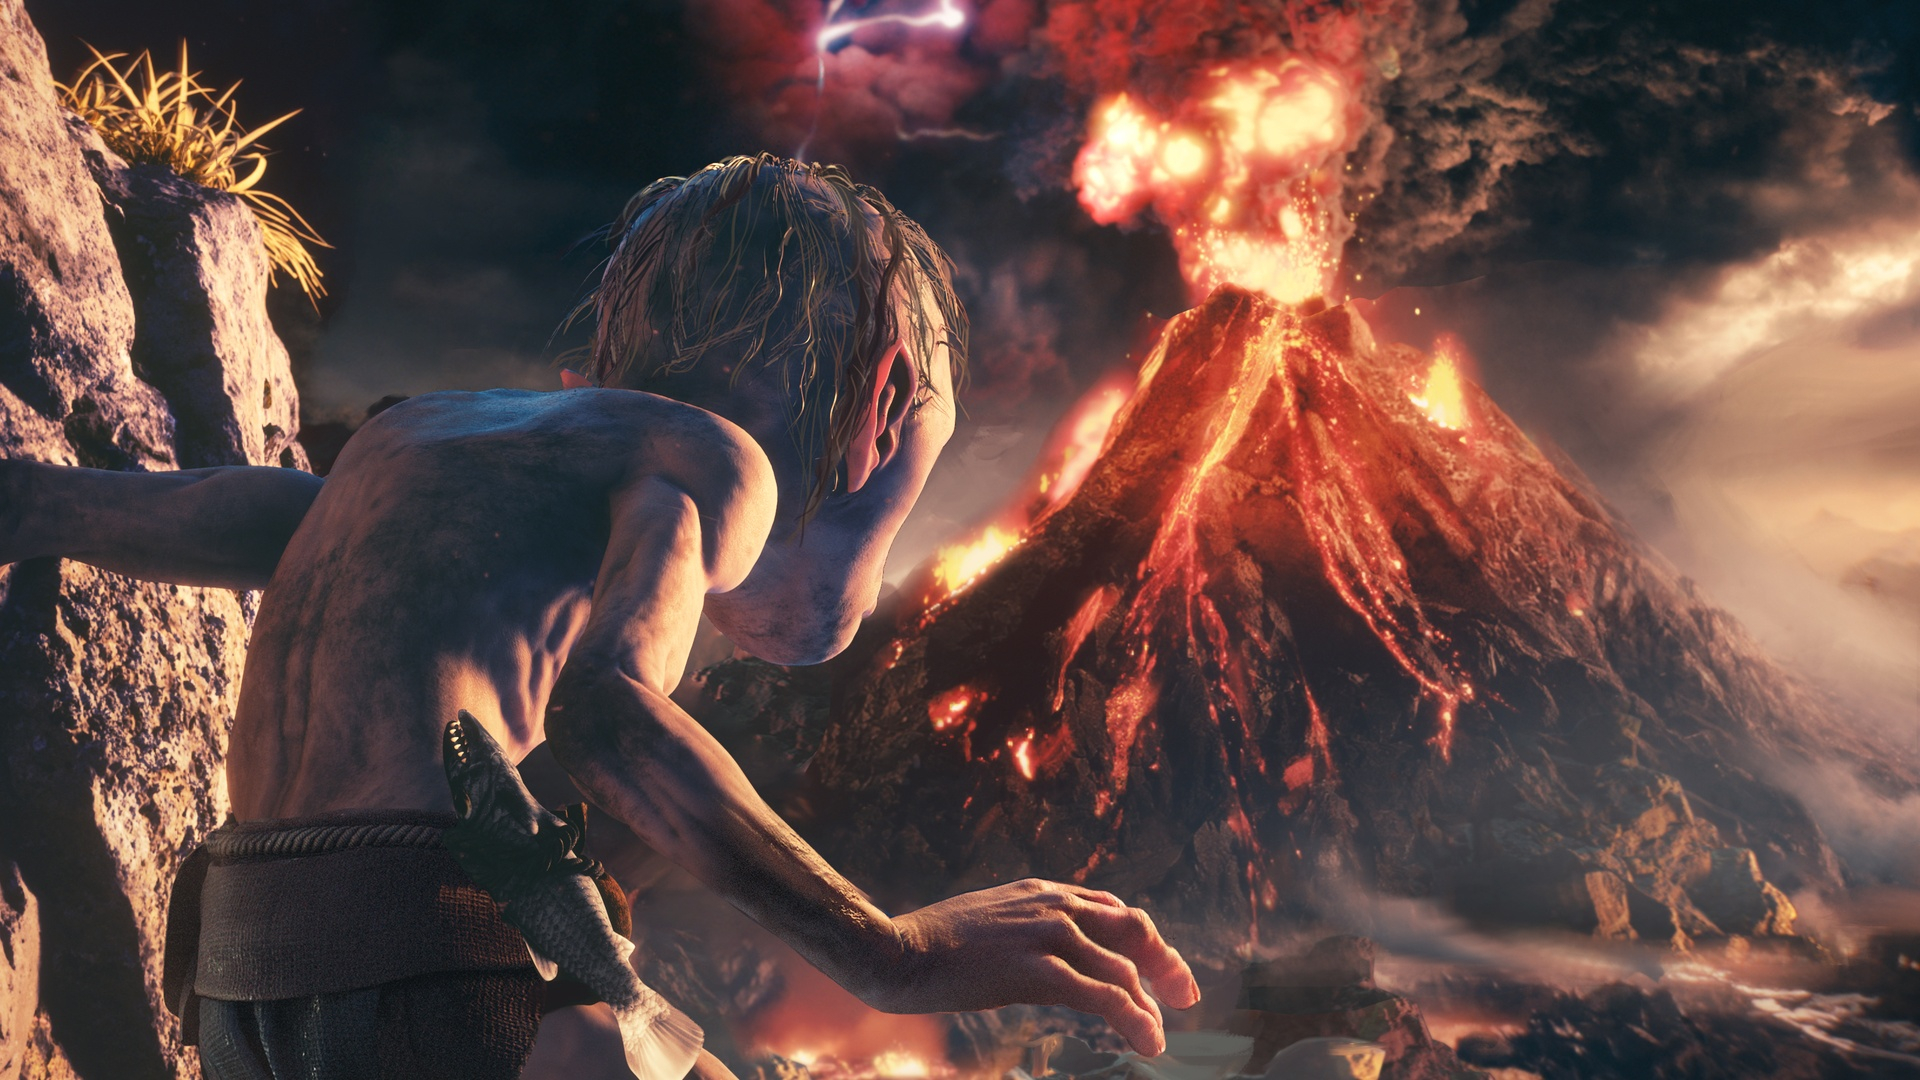 Lord of the Rings Gollum demo reveals largely combat-free gameplay